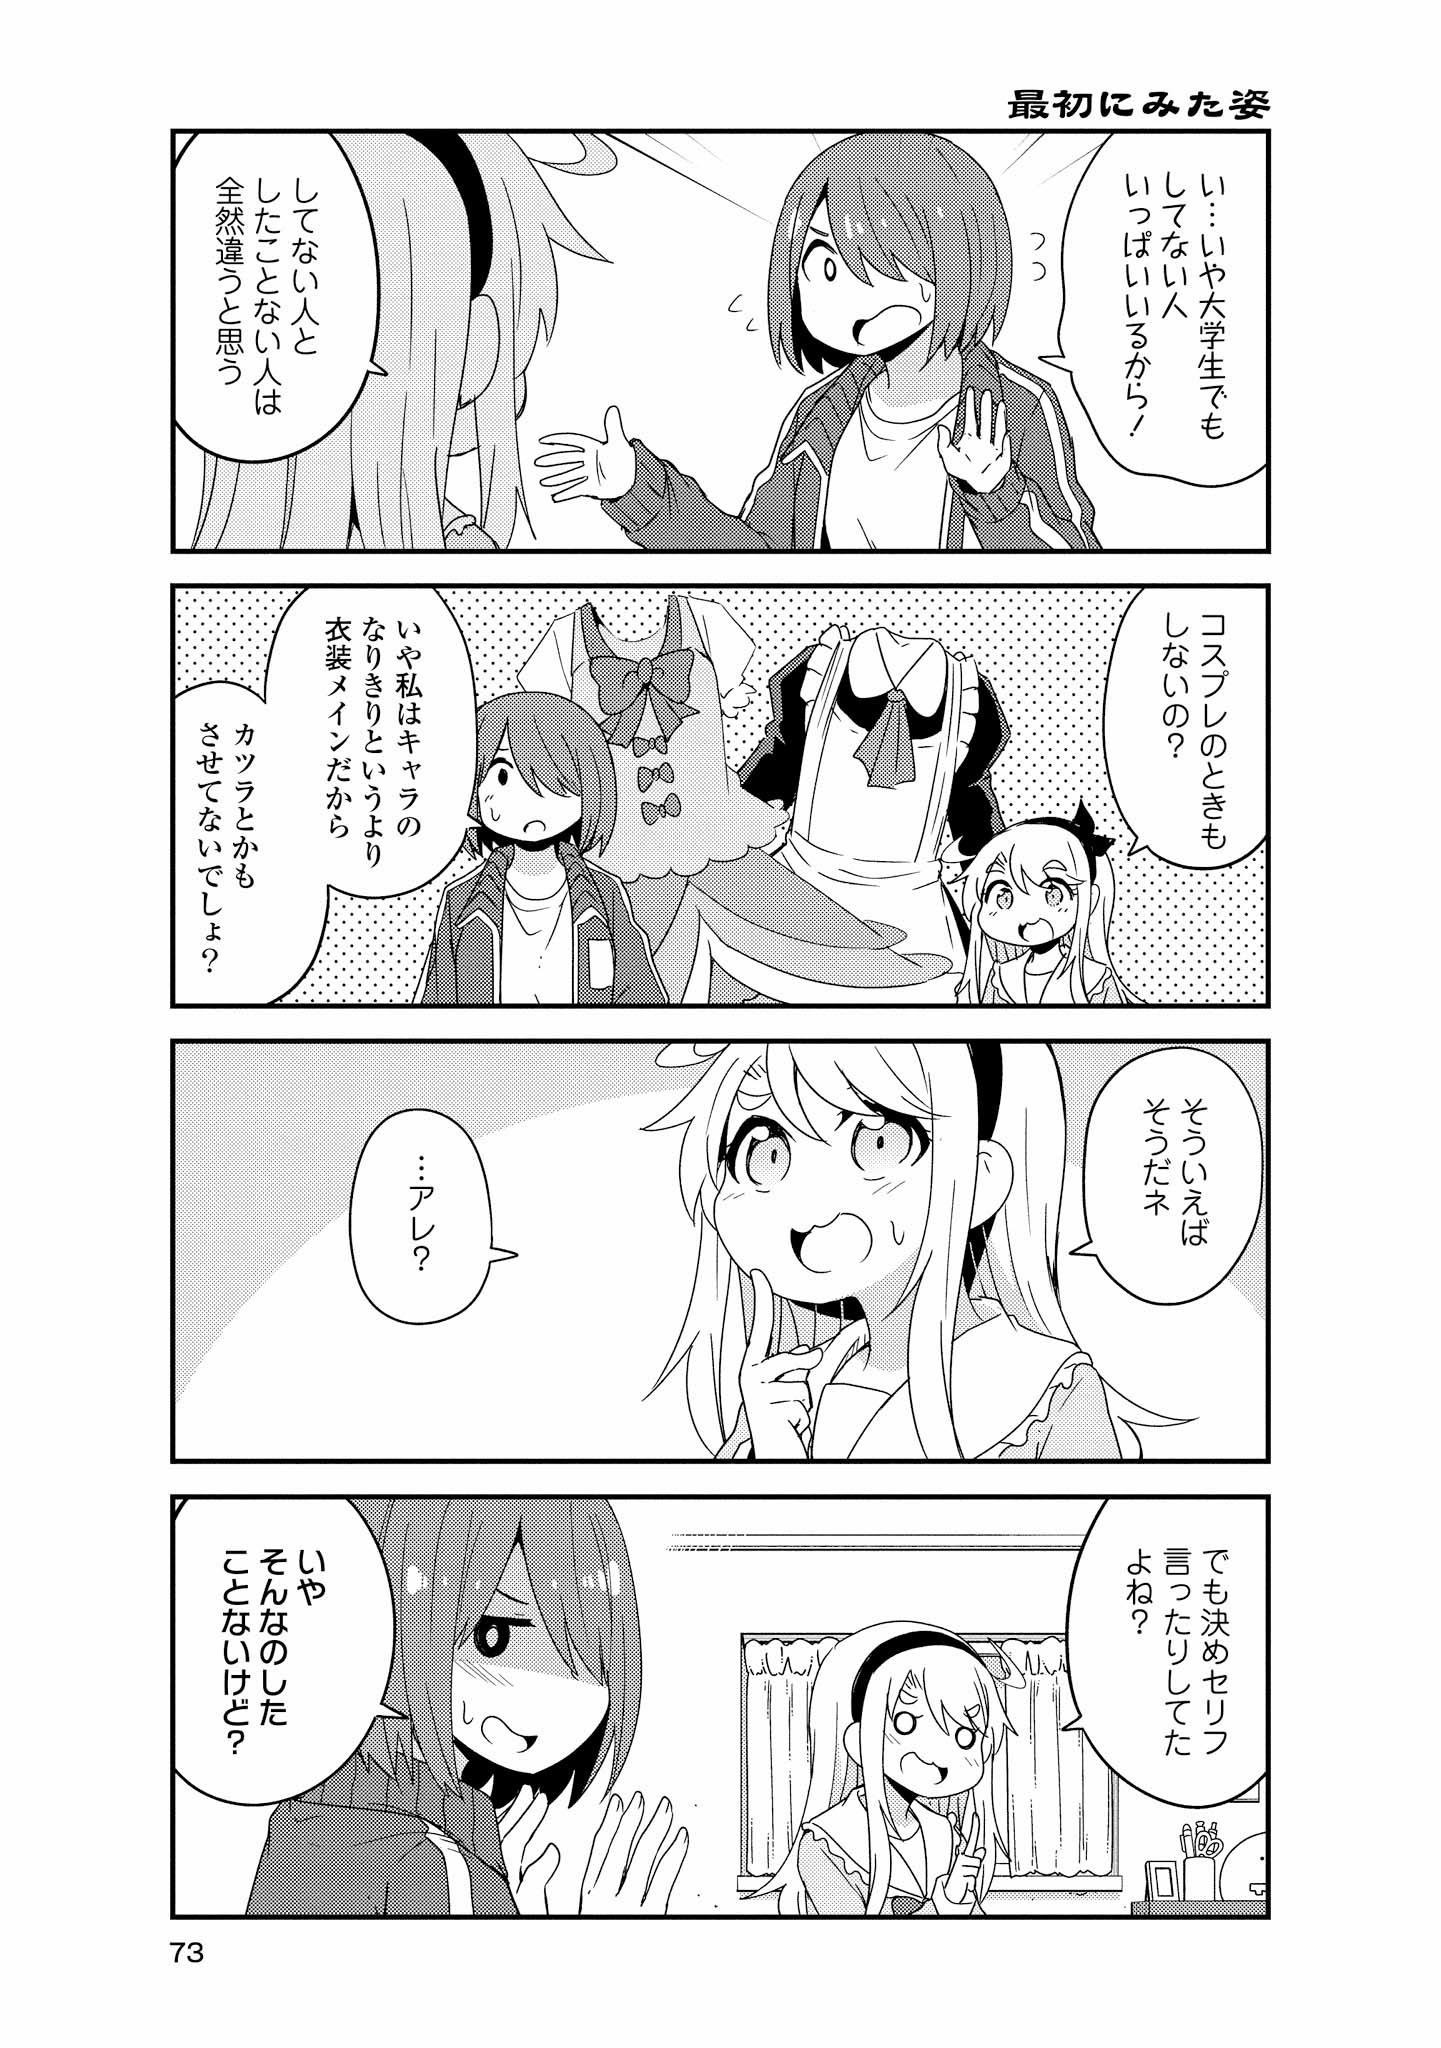 Wataten! An Angel Flew Down to Me 私に天使が舞い降りた！ 第40話 - Page 11